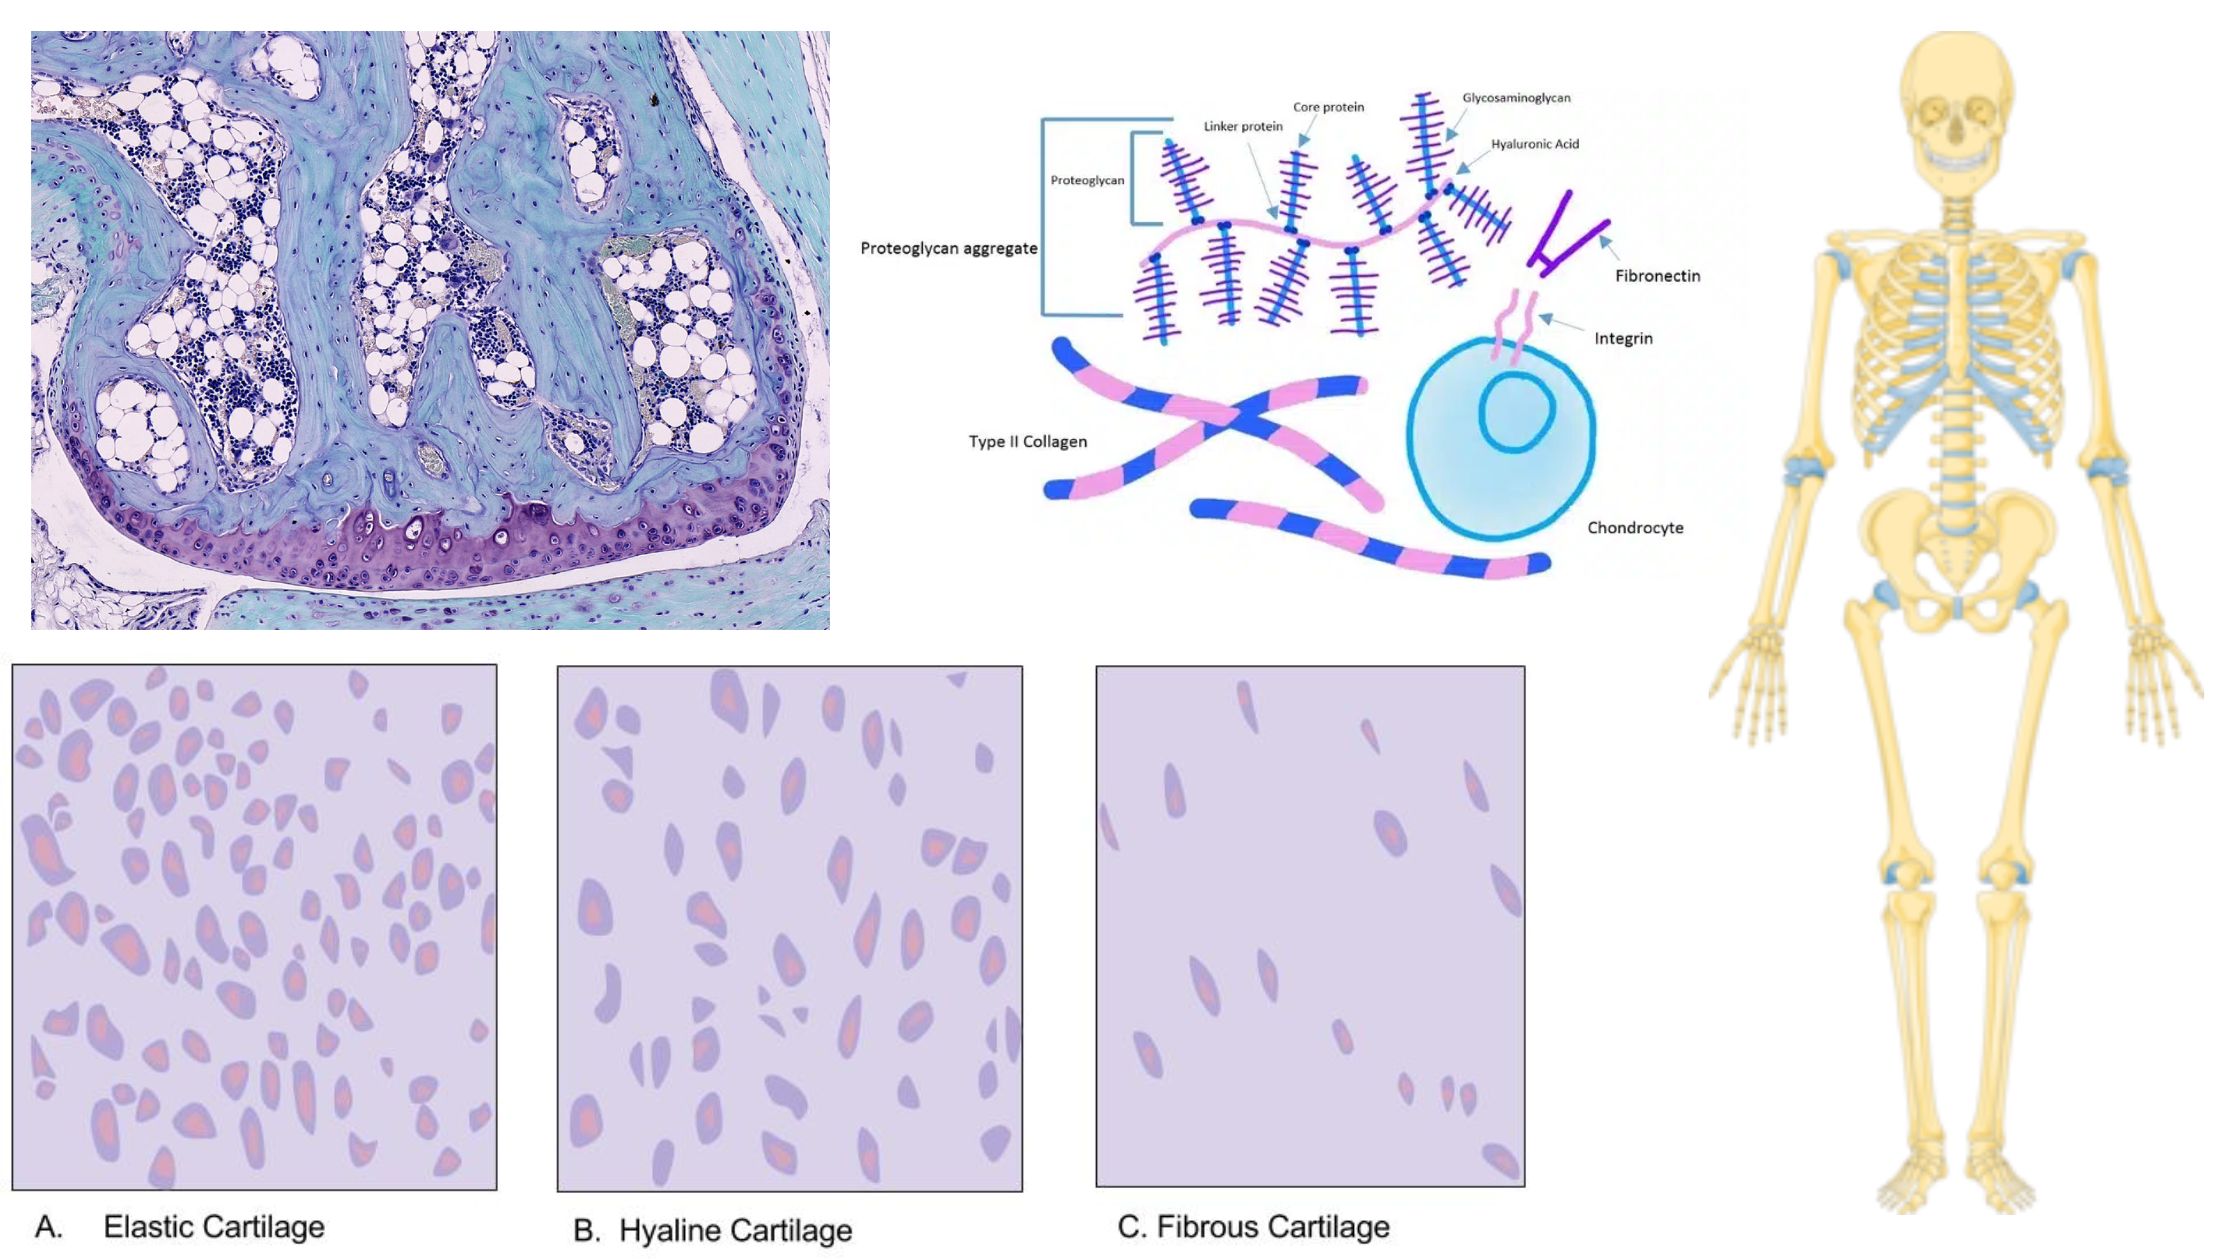 Cartilage - Definition, Structure, Types, Functions